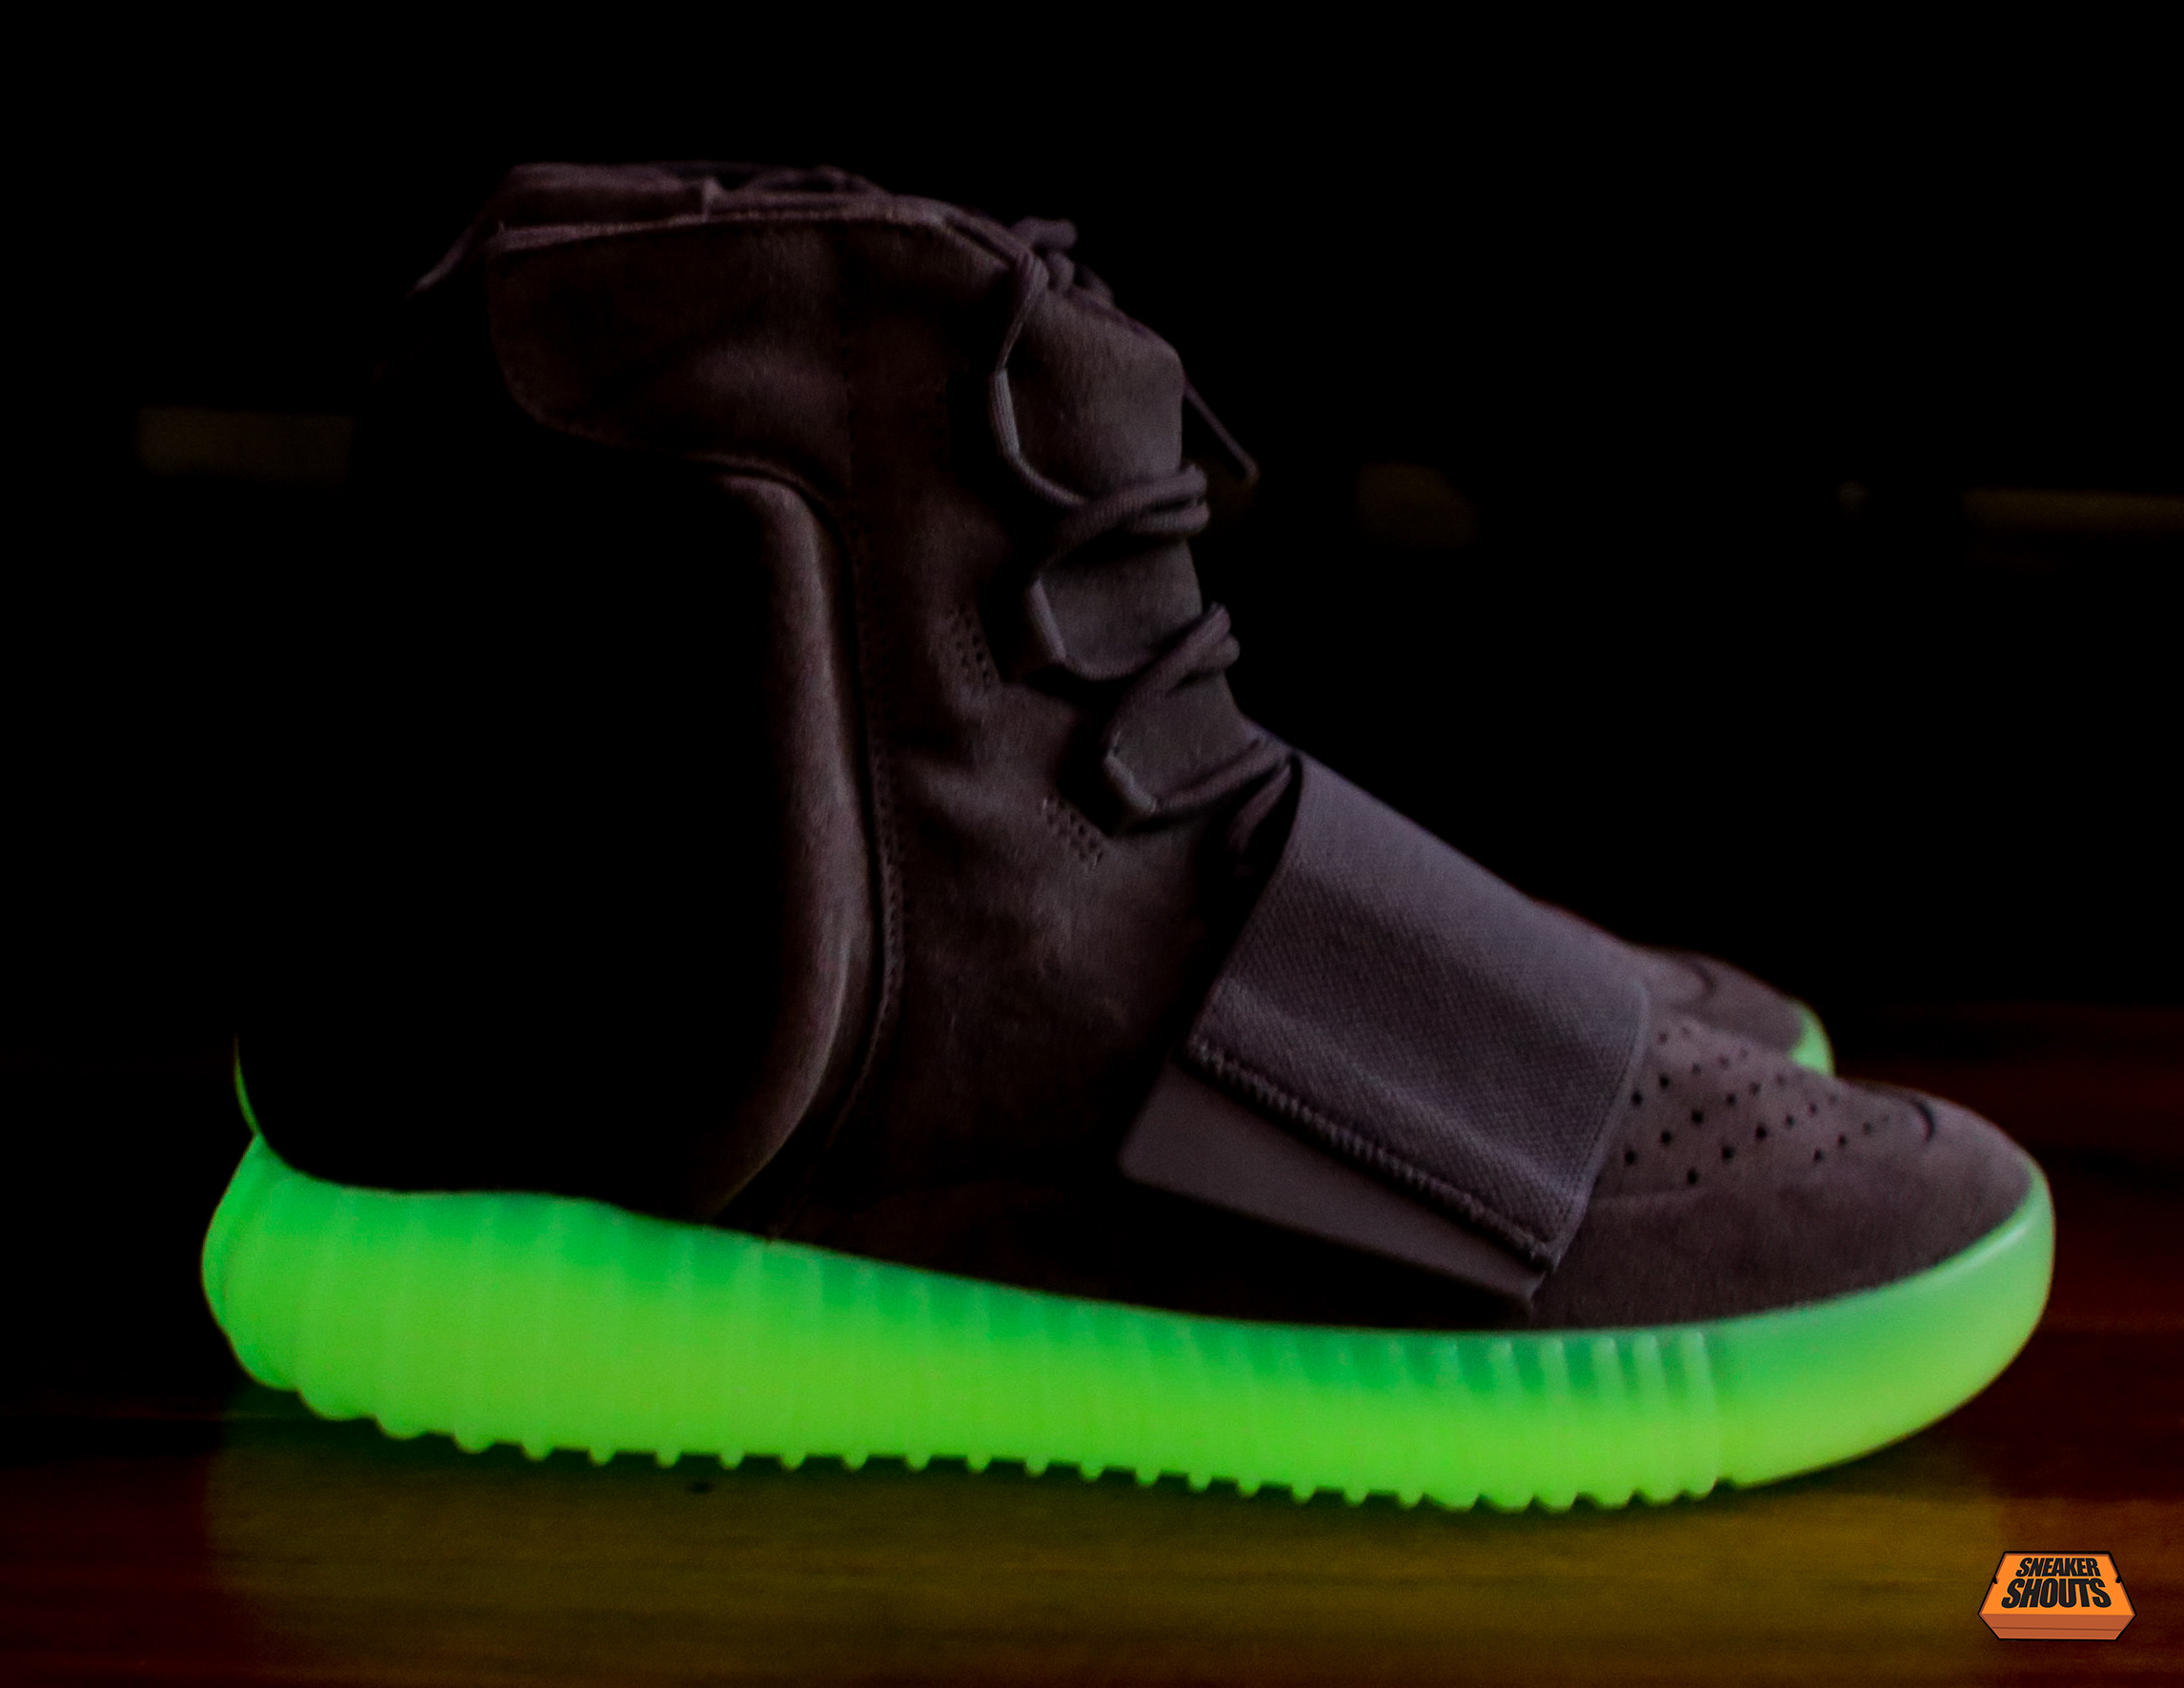 Tagged-Adidas-Yeezy-750-Boost-Light-Grey-Gum-Glow-In-The-Dark-10.png